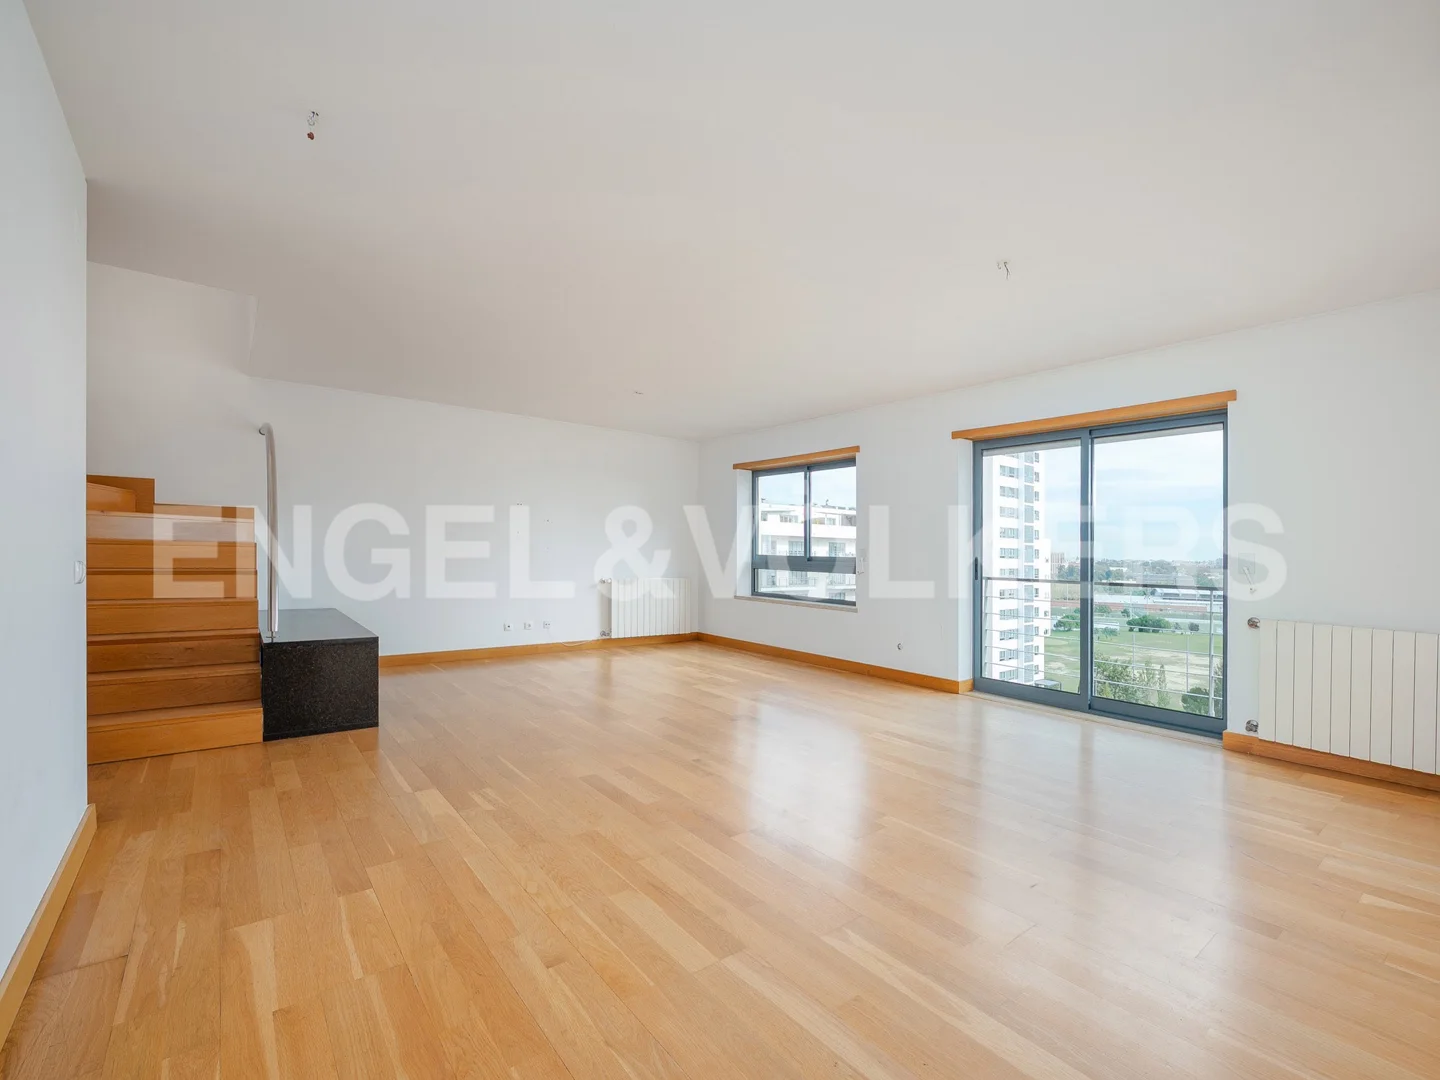 Duplex with 4 Bedrooms and Parking in Alvalade